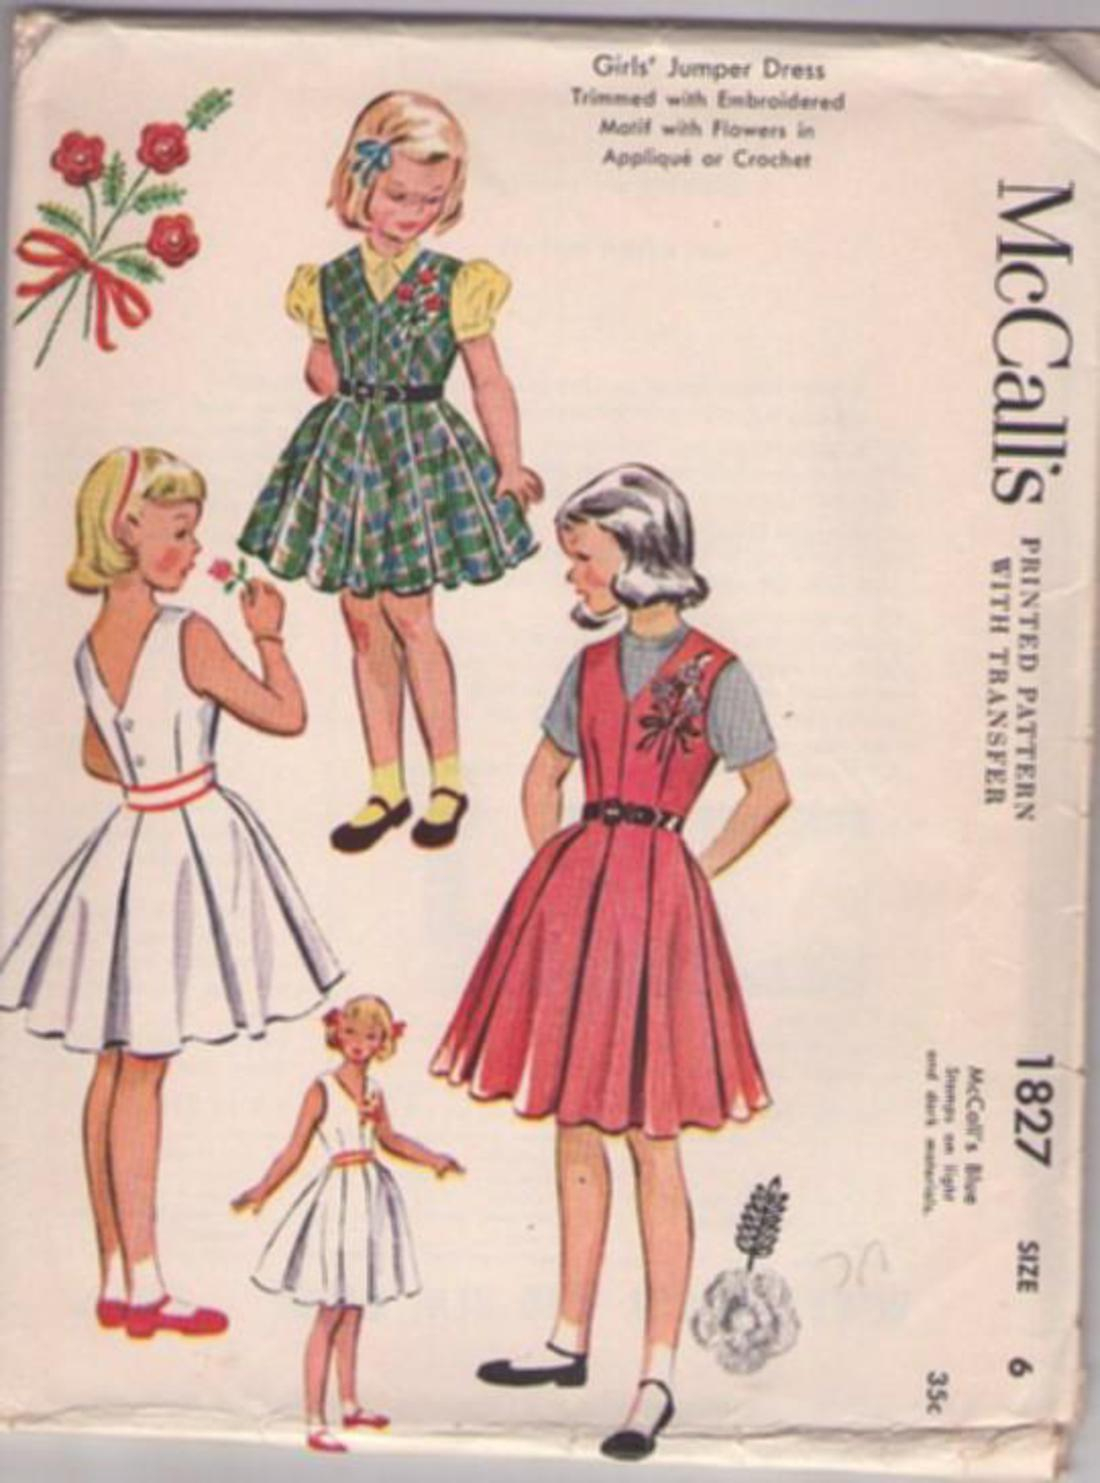 Embroidery Dress Patterns Mccalls 1827 Vintage 50s Sewing Pattern Sweet Girls Modest School Days V Neck Summer Jumper Box Pleats Skirt Dress With Embroidery Transfer Size 6